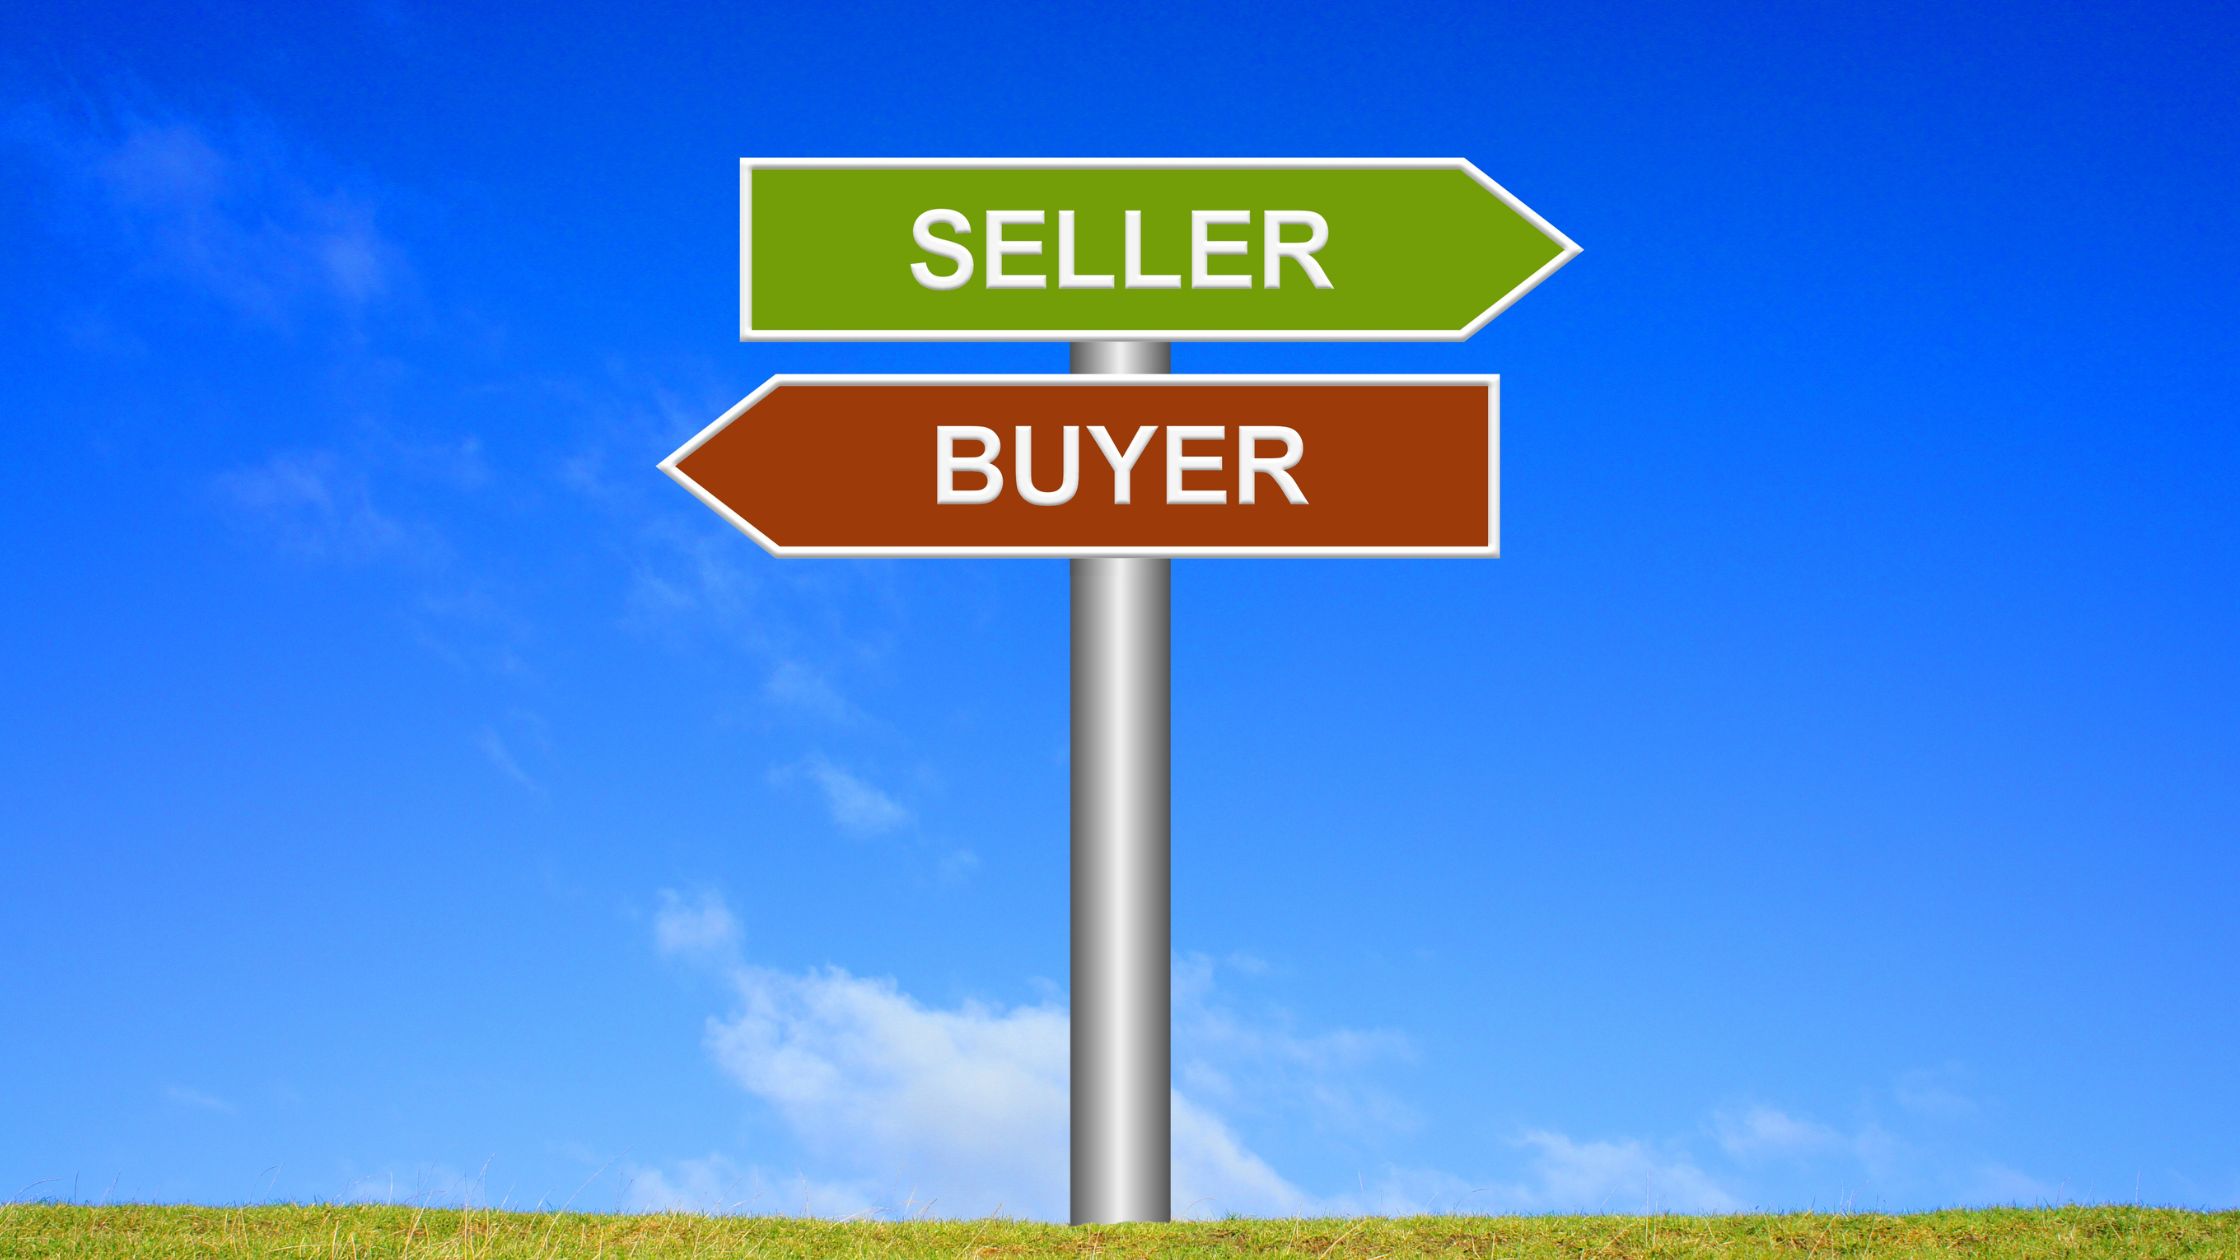 How to Tell the Difference Between a Buyer’s and Seller's Market